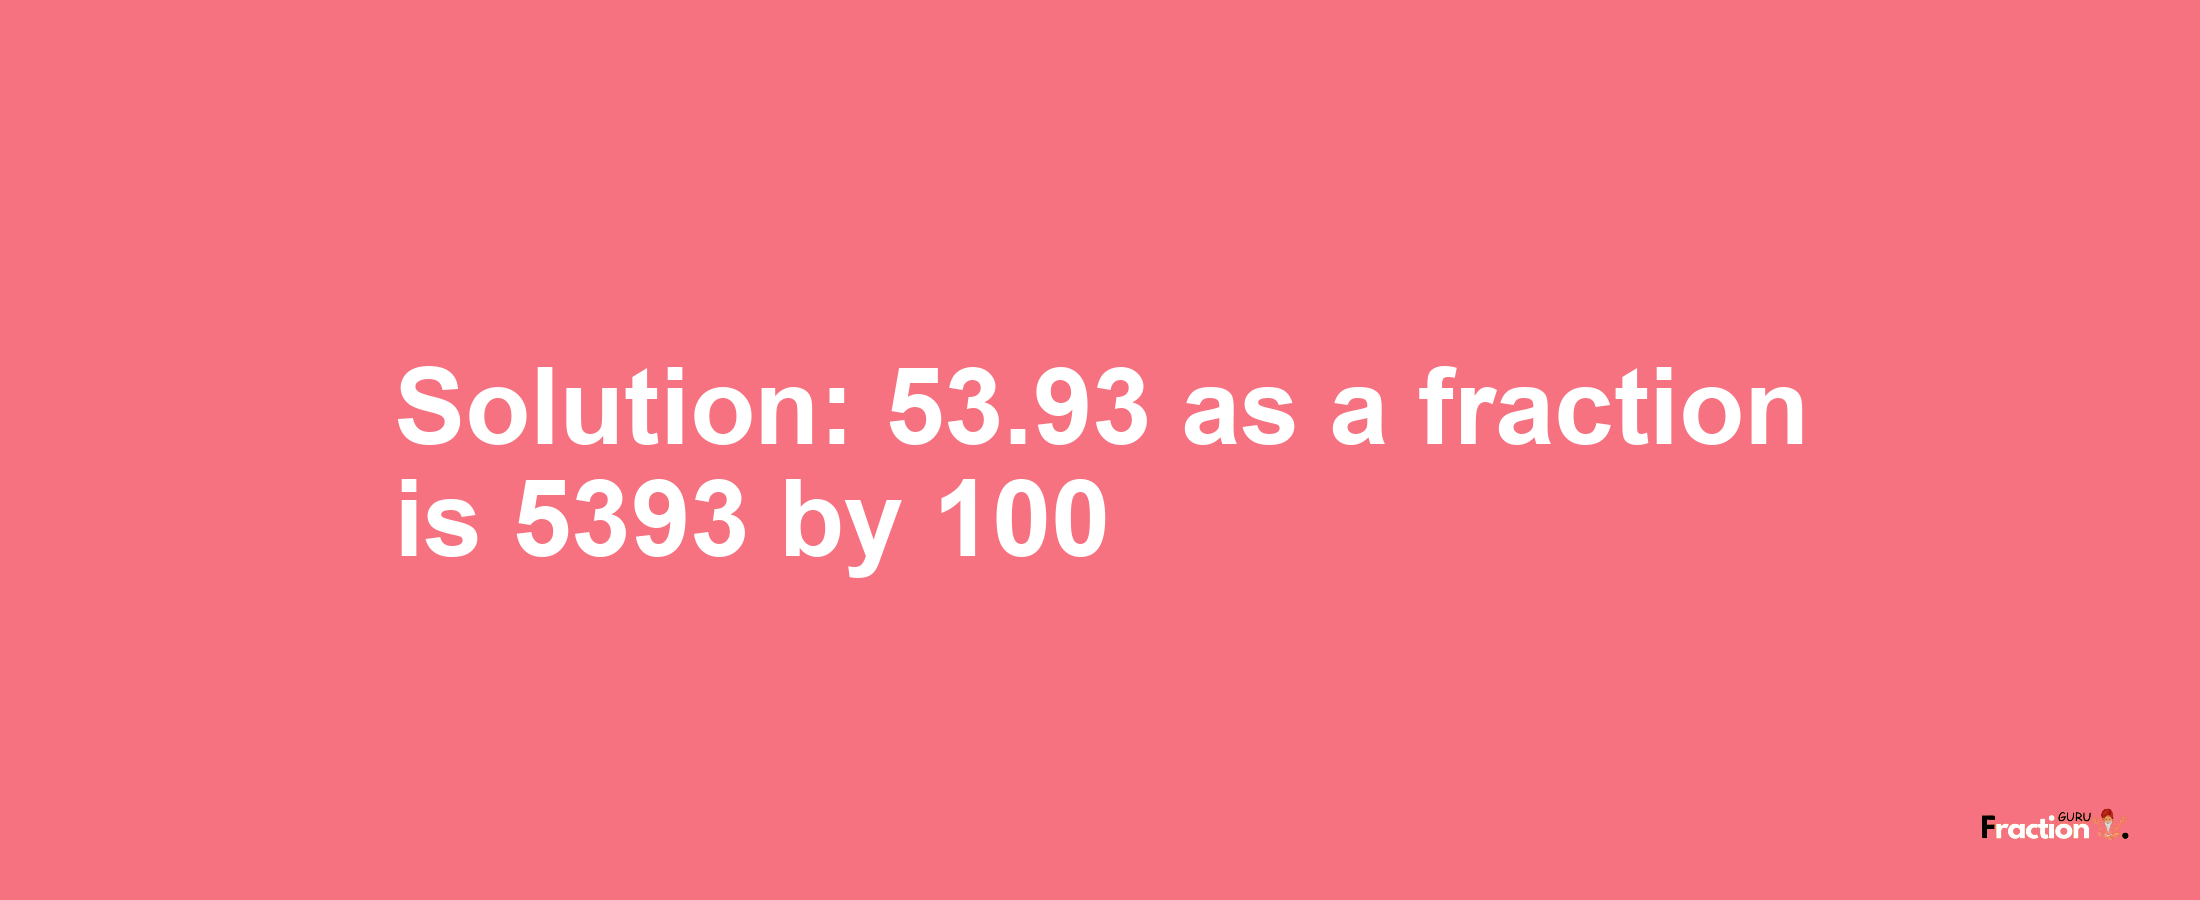 Solution:53.93 as a fraction is 5393/100